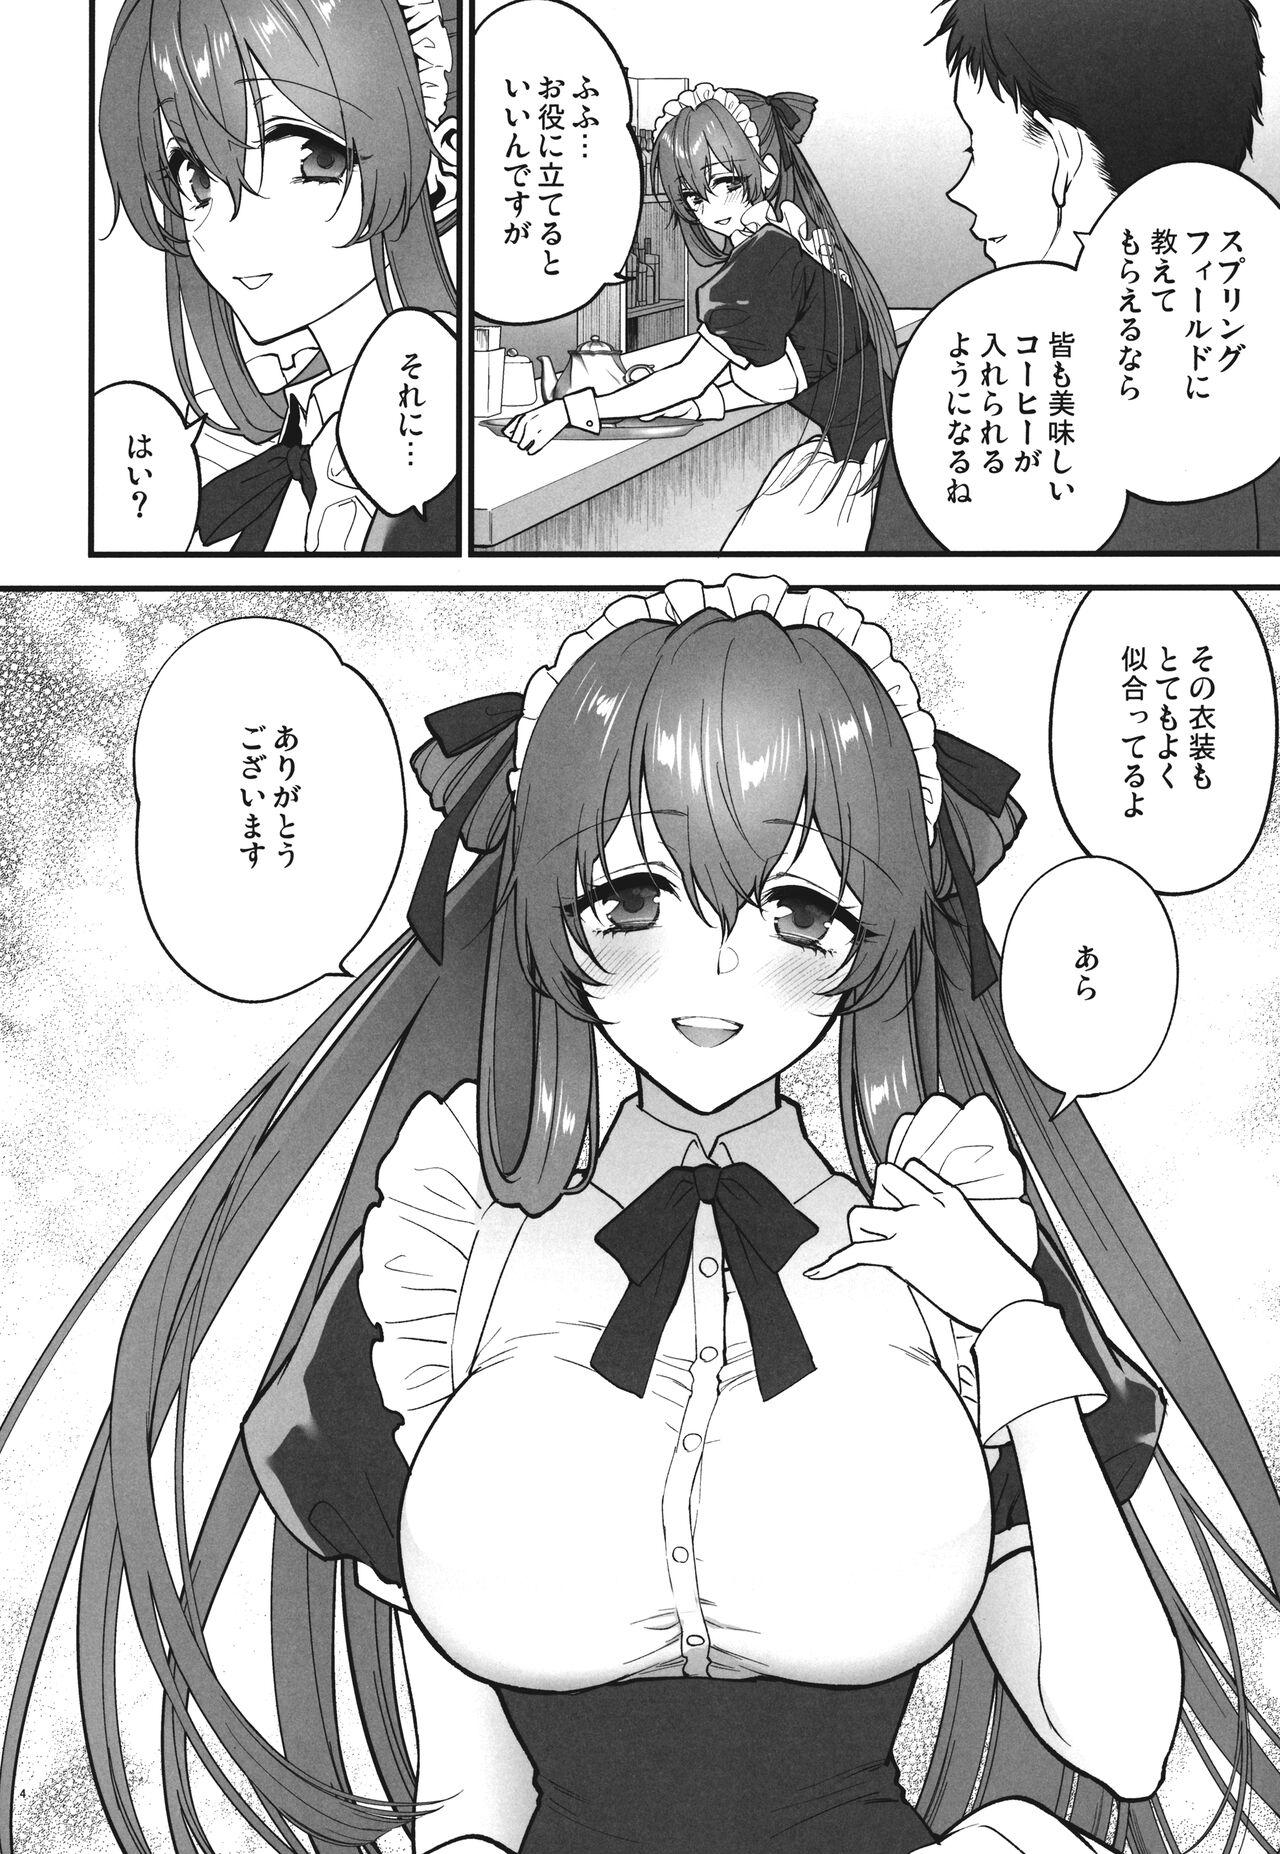 Assfucking Make me Yours - Girls frontline Sapphicerotica - Page 3